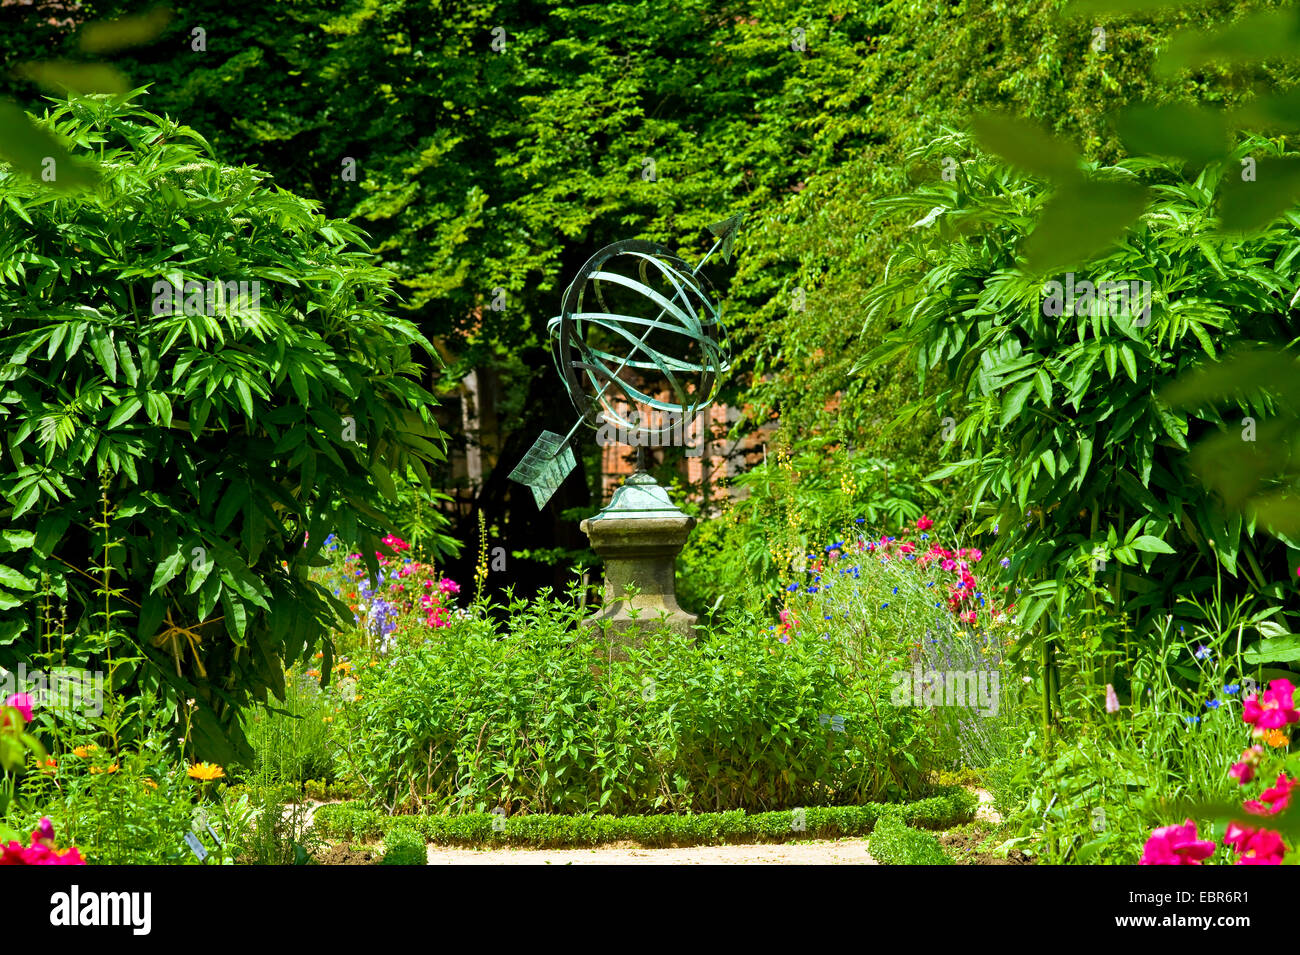 old copper sun dial in a rural garden, Germany Stock Photo